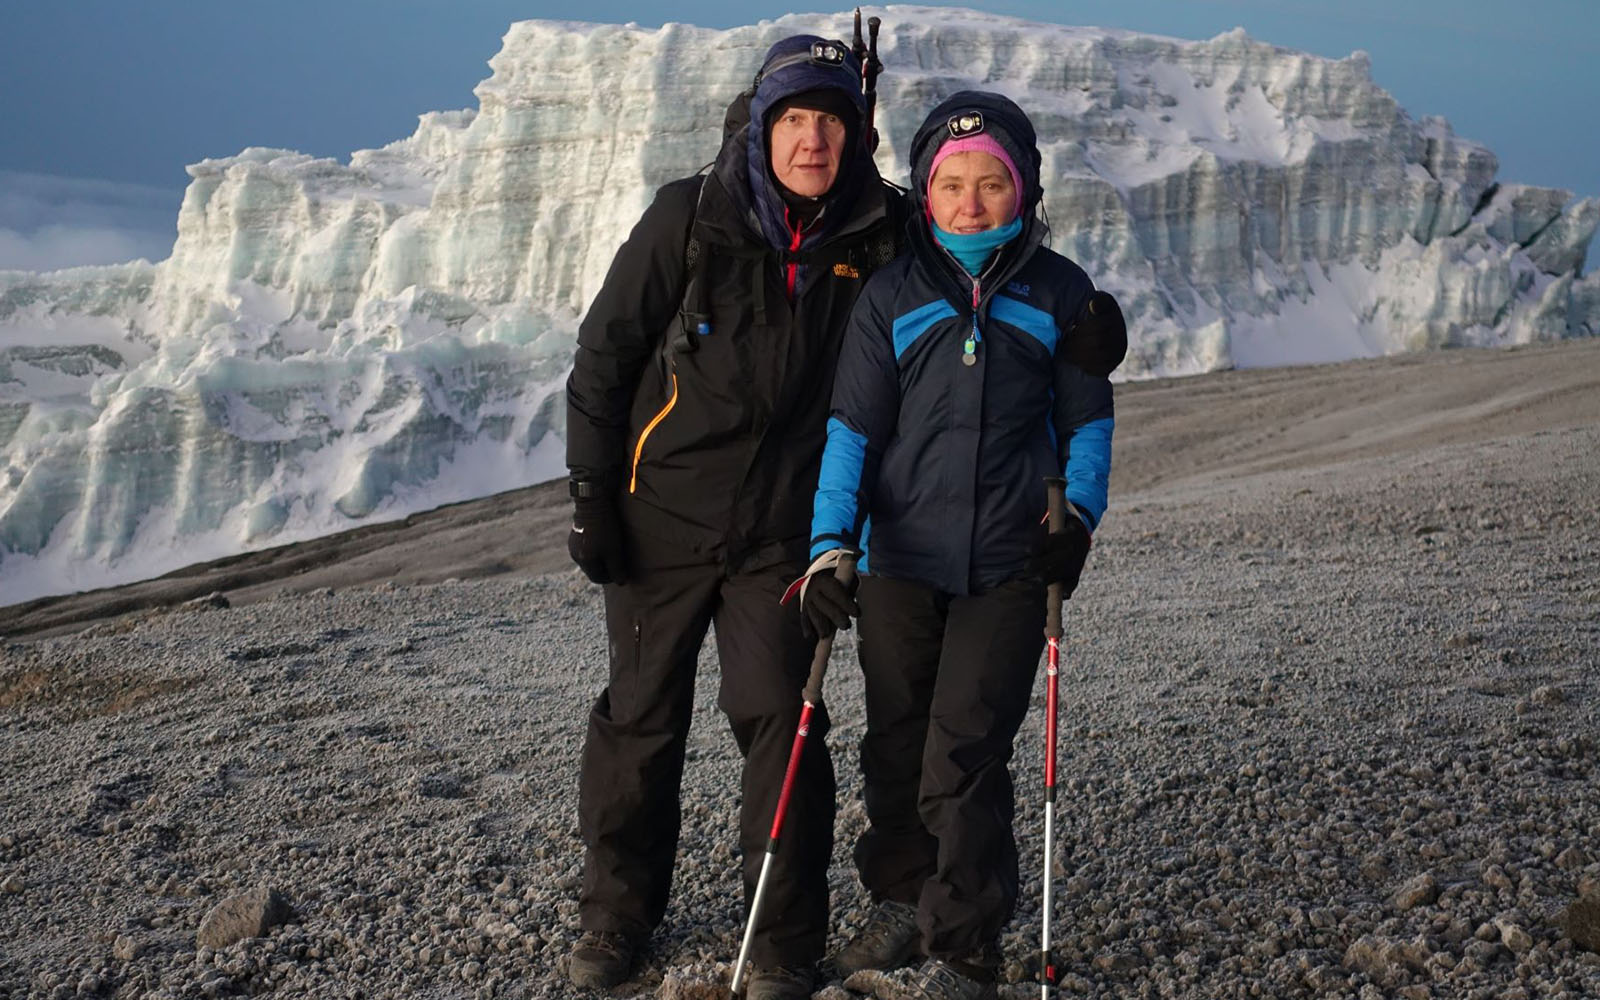 Martin Burt with his wife Sevinc at Everest Base Camp